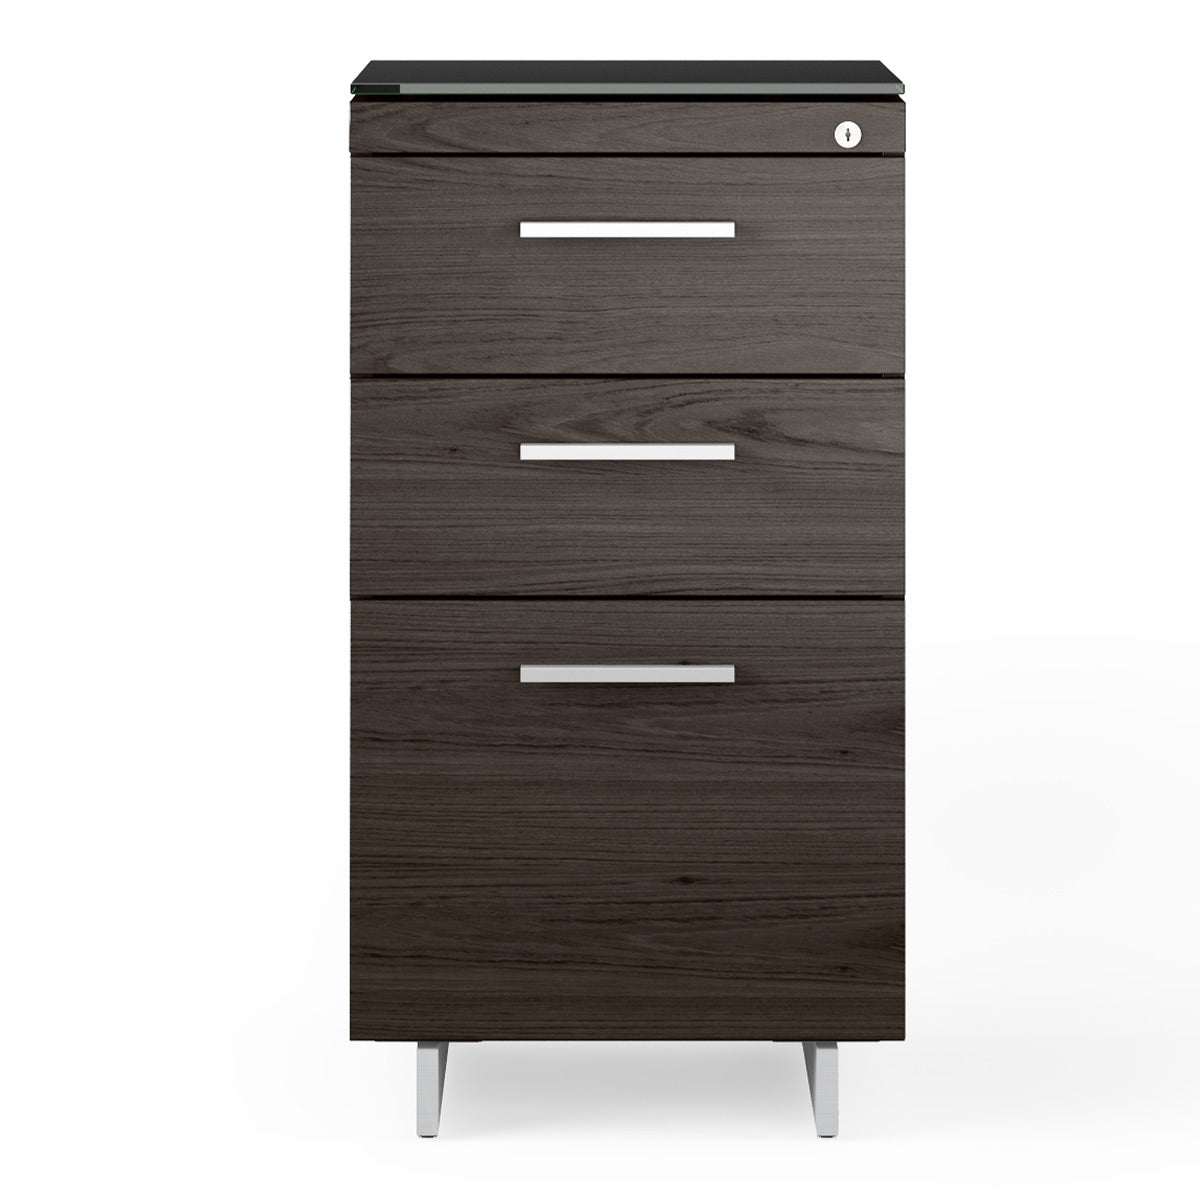 BDI Sequel 20 6114 3 Drawer File Cabinet (Charcoal/Nickel)